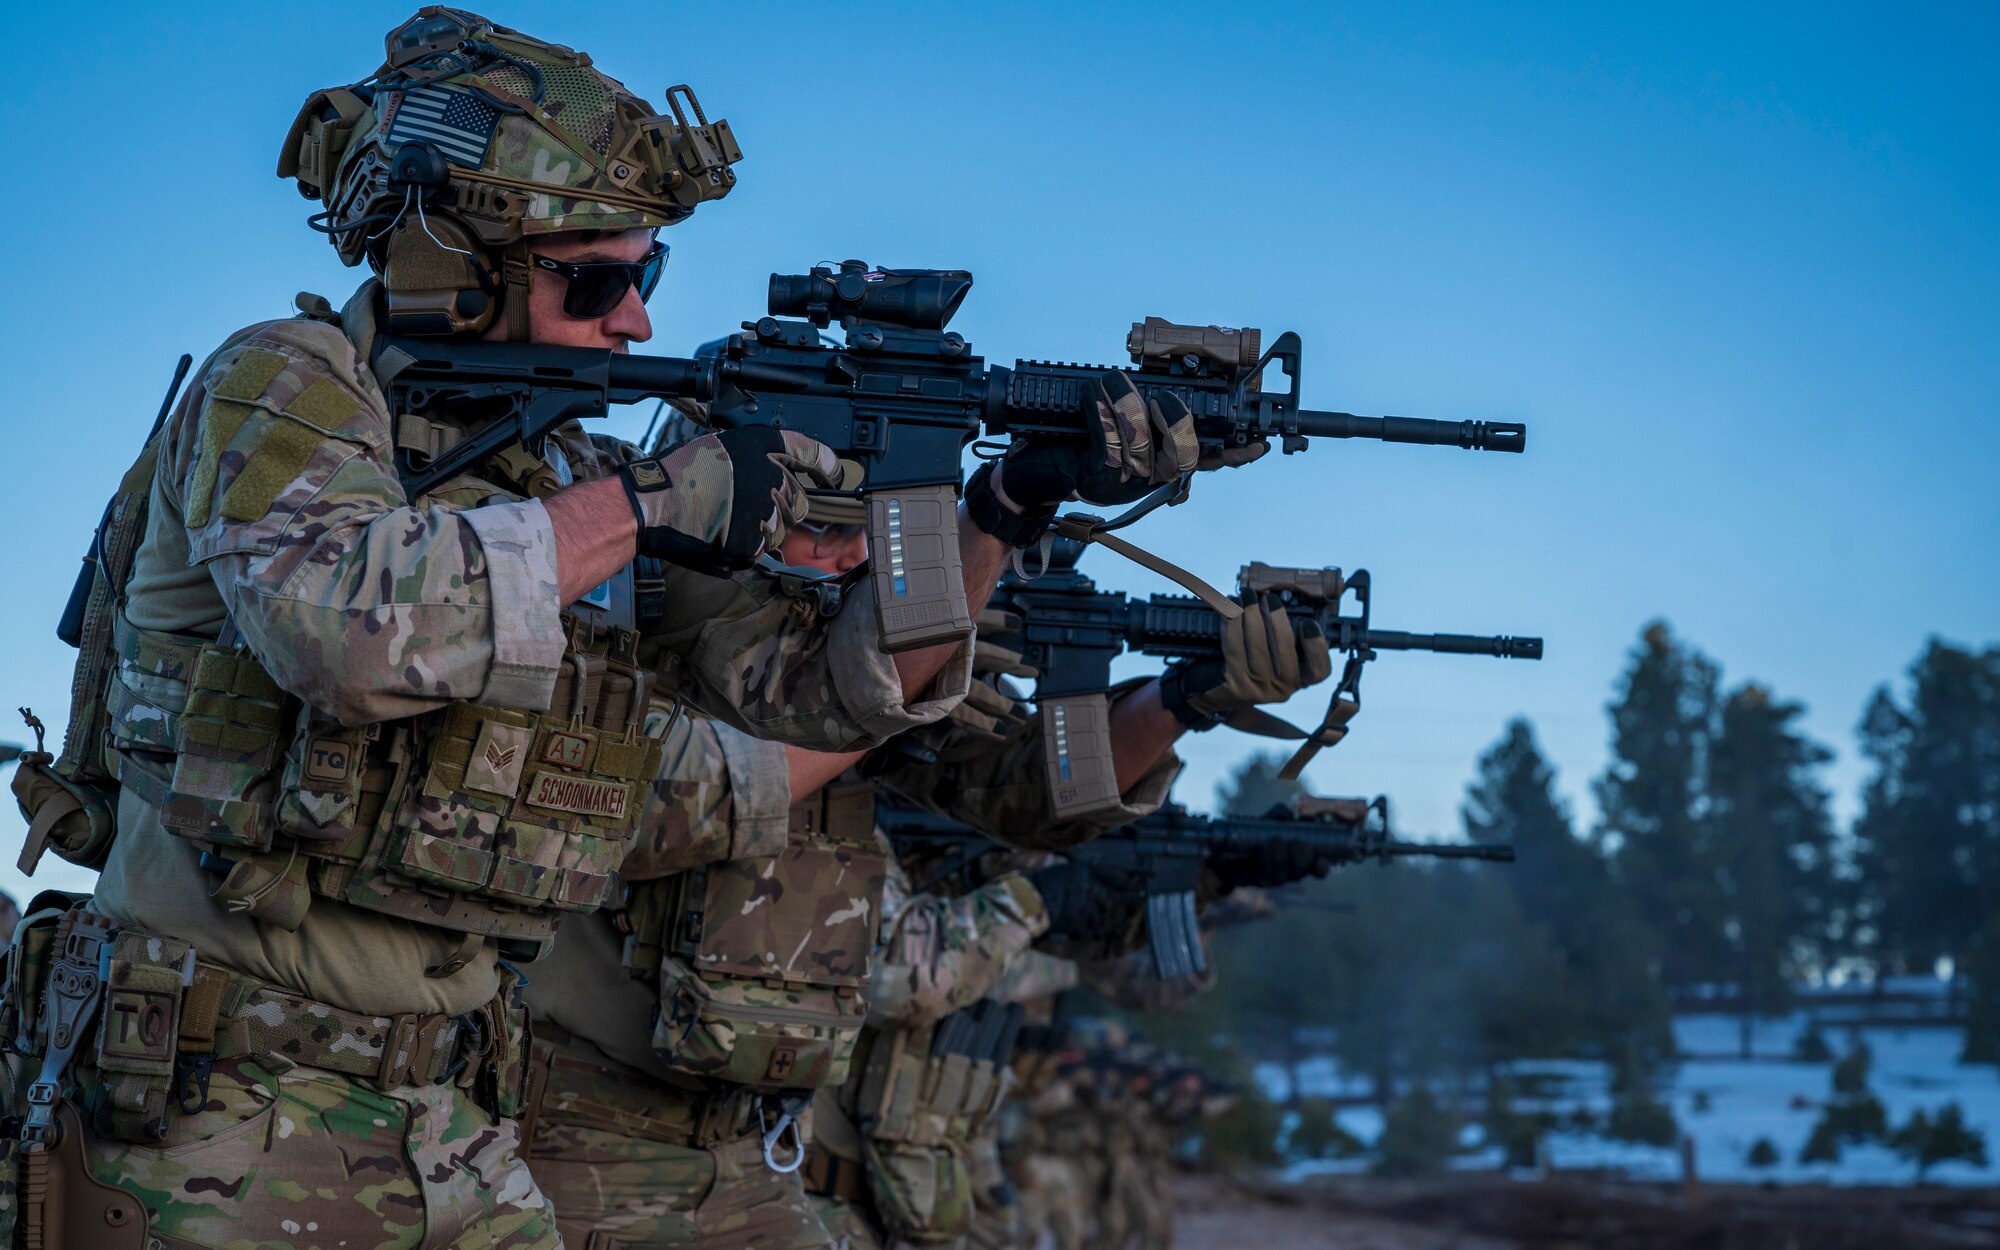 Members assigned to the 56th Civil Engineer Squadron Explosive Ordnance Disposal flight train with M4 carbine assault rifles on a firing range at Camp Navajo, Arizona, April 10, 2023.